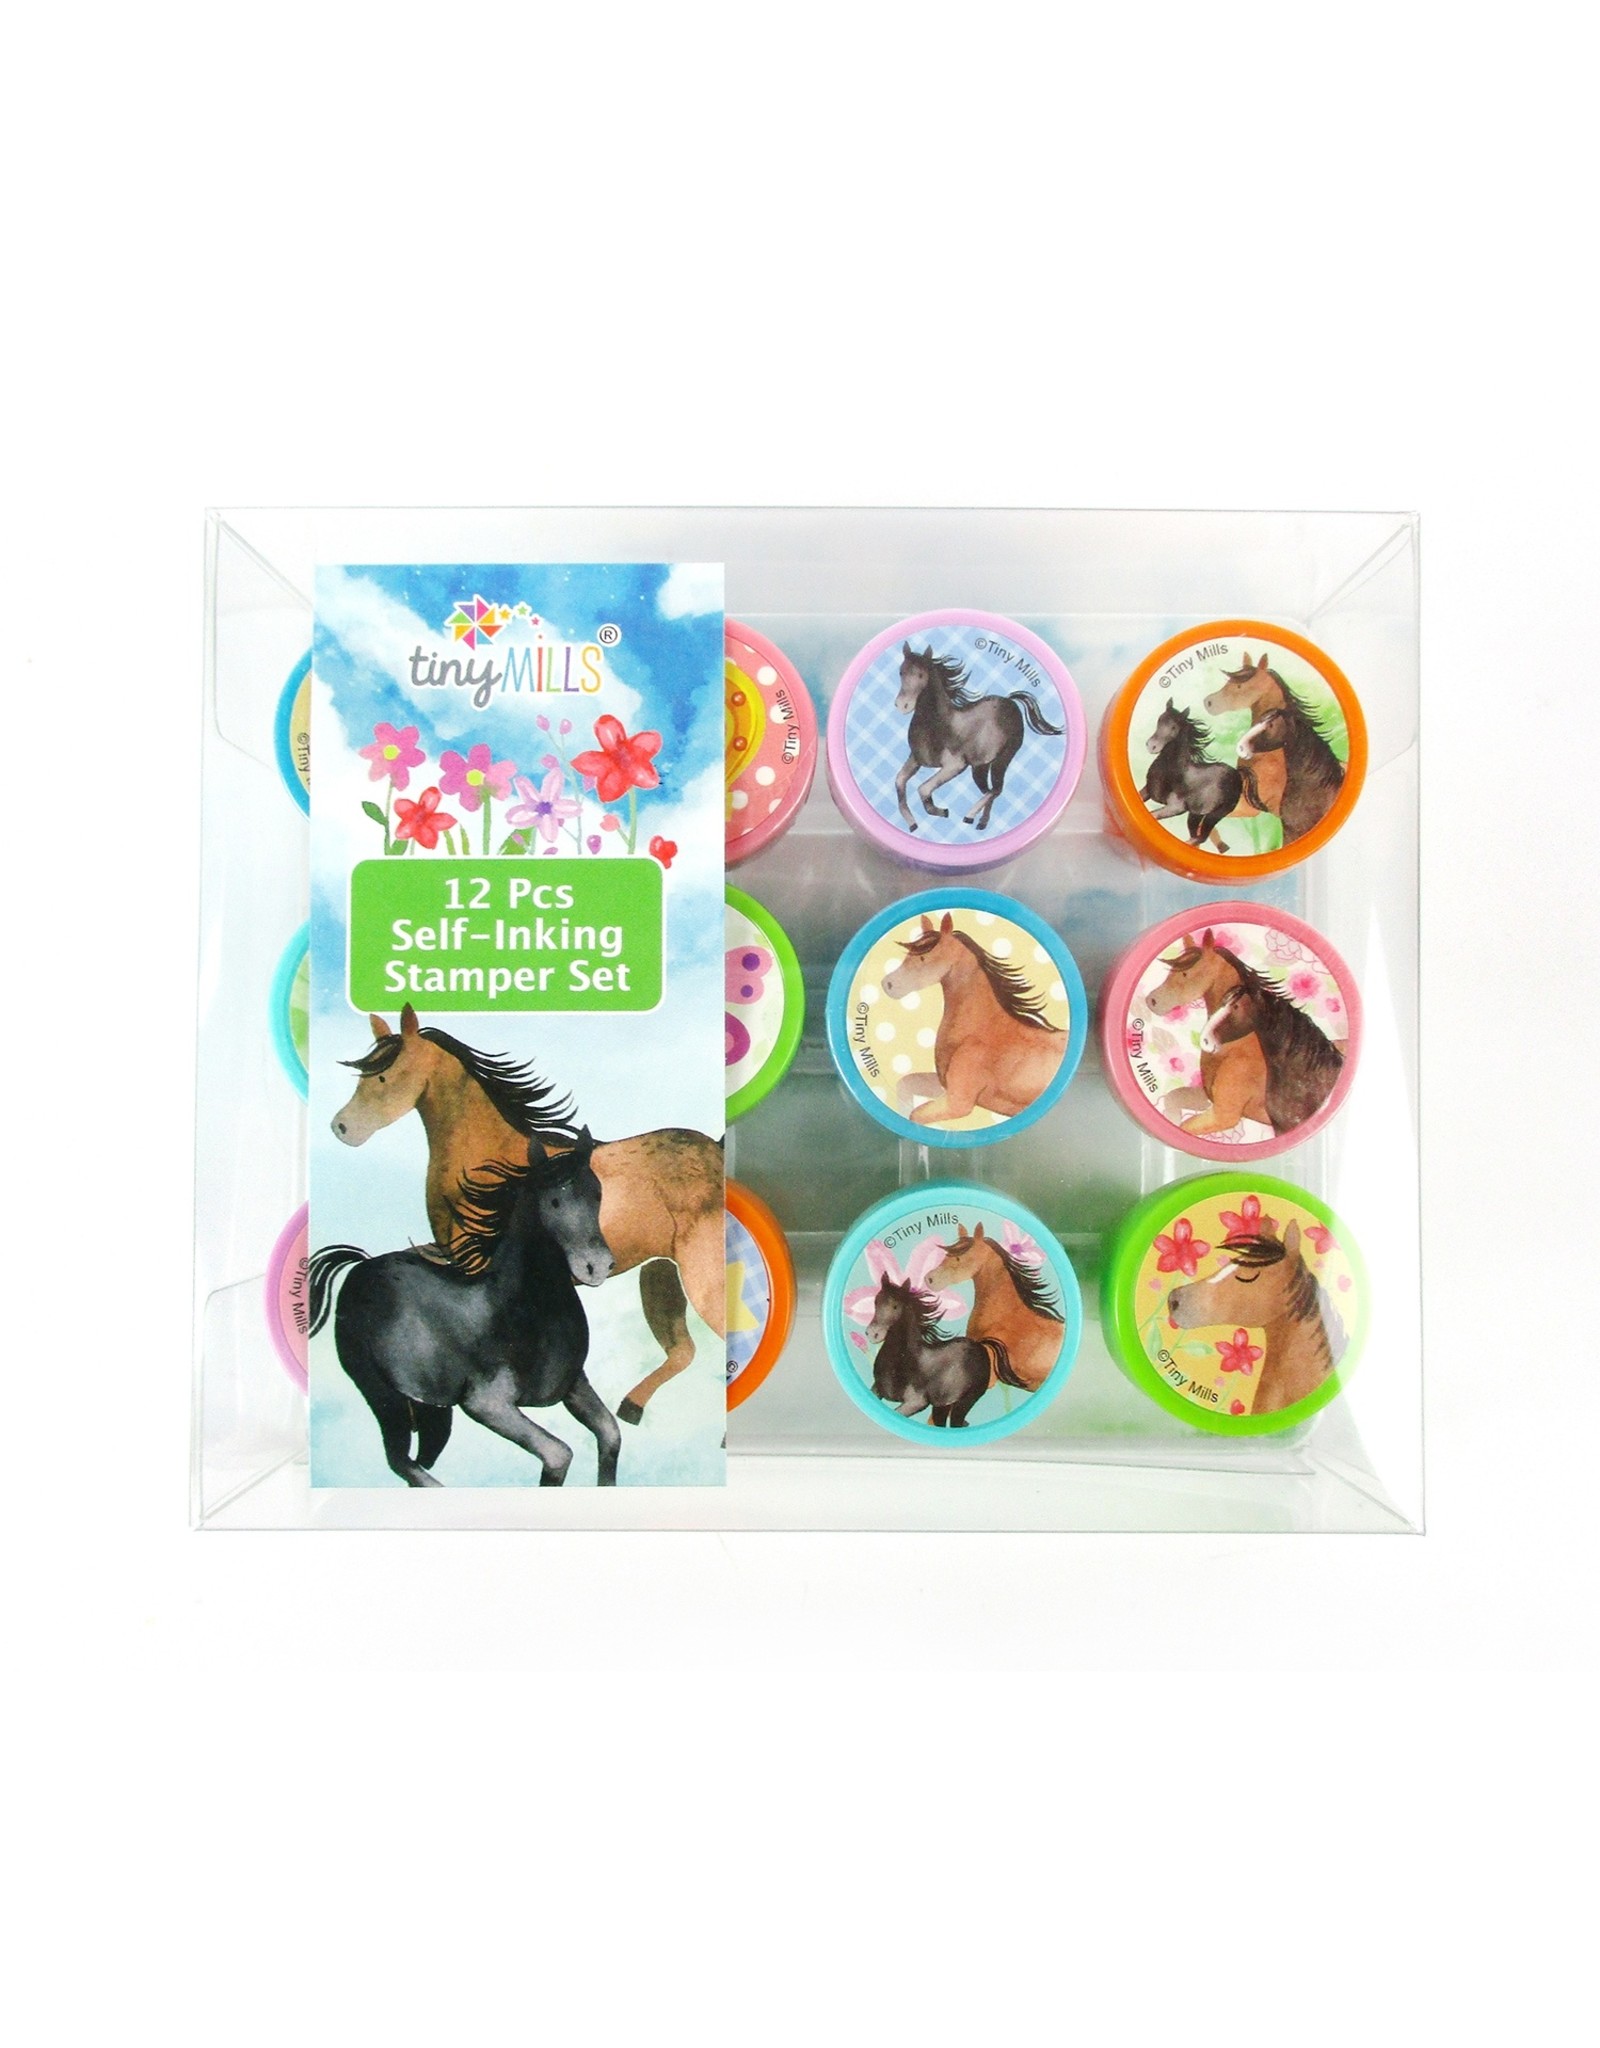 Tiny Mills Horse and Pony Stamp Kit for Kids